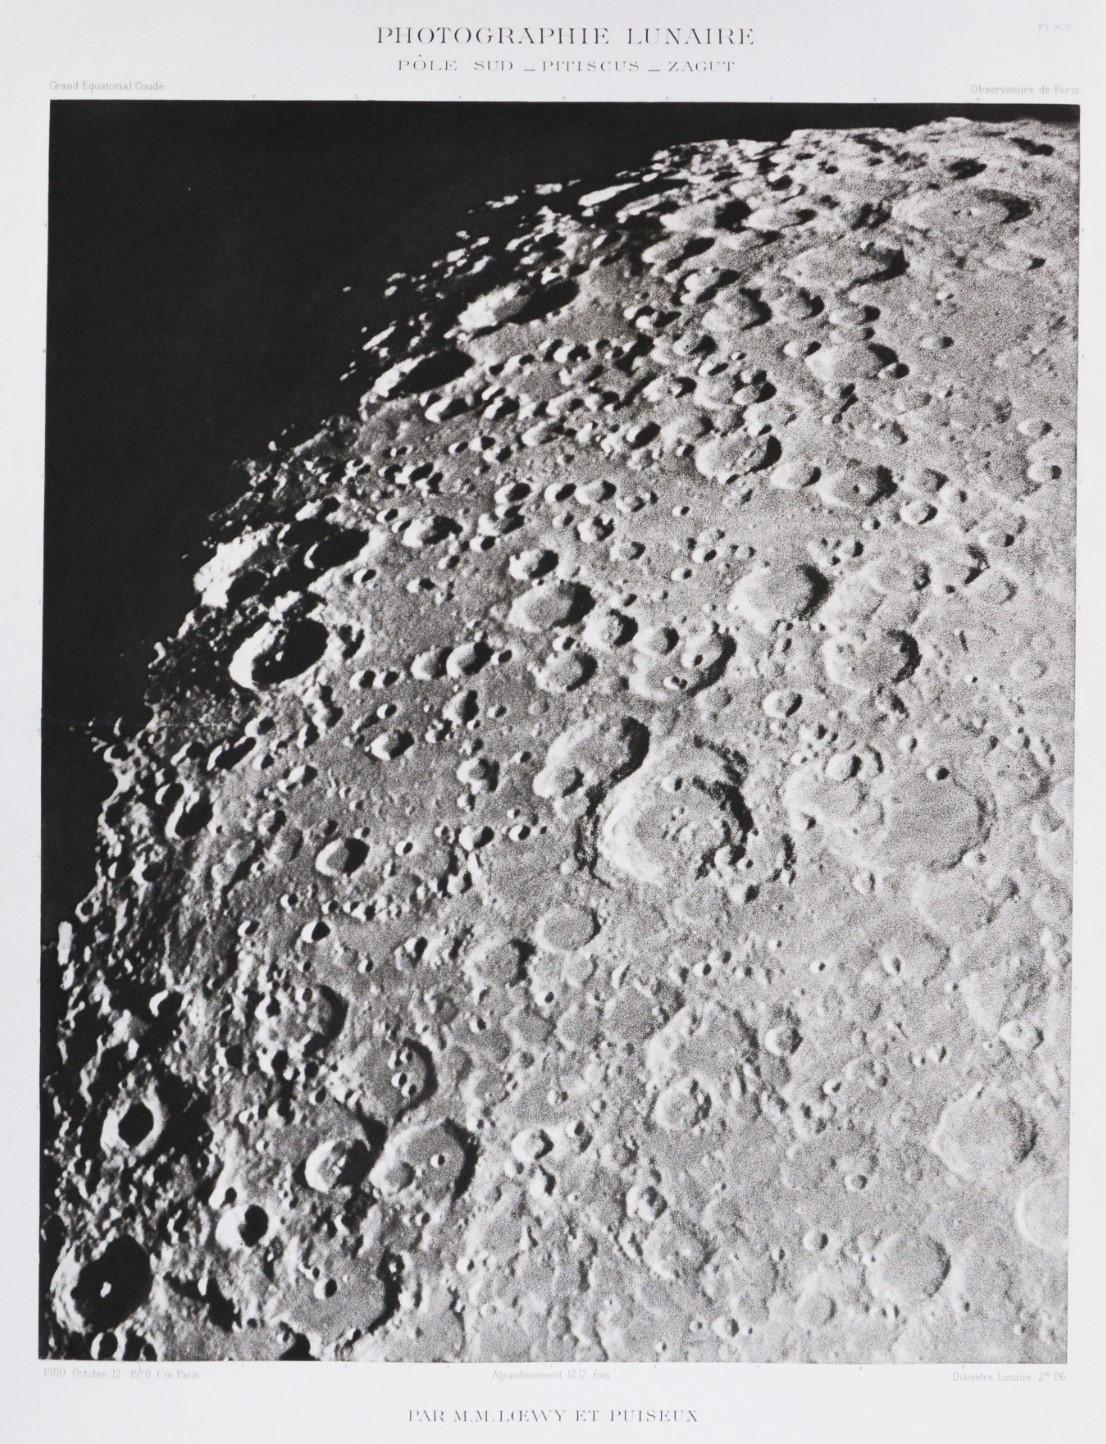 PÔLE SUD_PITISCUS_ZAGUT.   Héliogravure of the Moon's Surface - Gray Black and White Photograph by Moritz Loewy; Pierre-Henry Puiseux